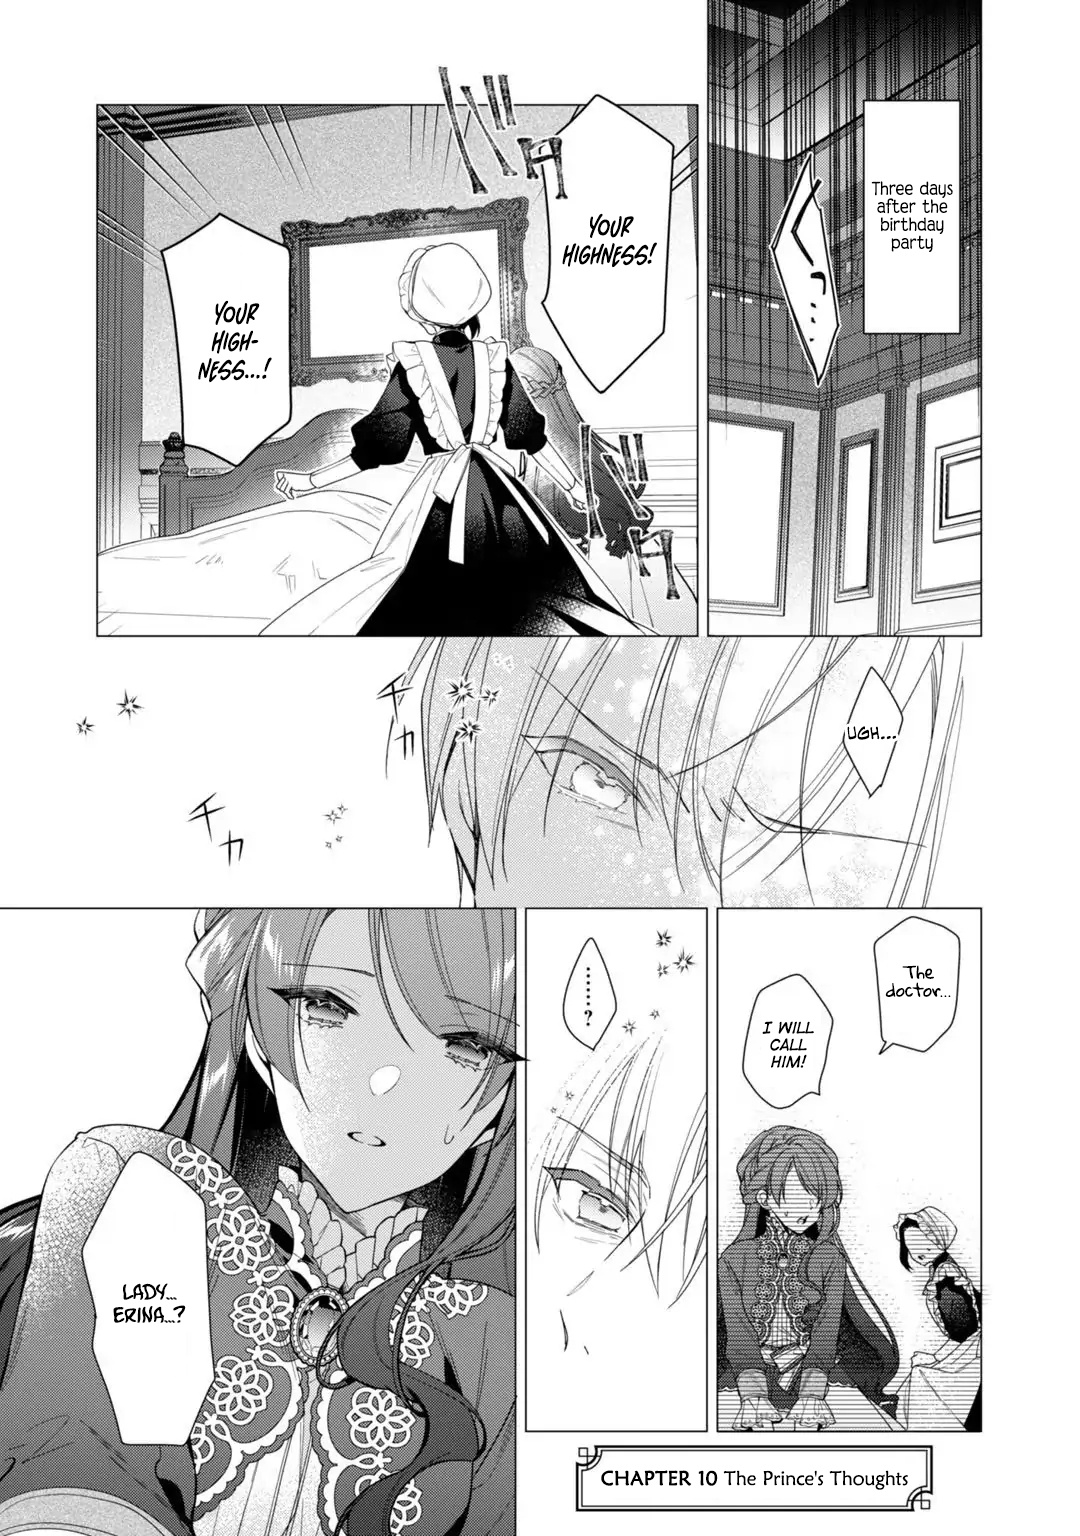 The Rubelia Kingdom’S Tale ~ I Ended Up Cleaning My Younger Cousin’S Mess ~ Vol.2 Chapter 10: The Prince's Thoughts - Picture 2